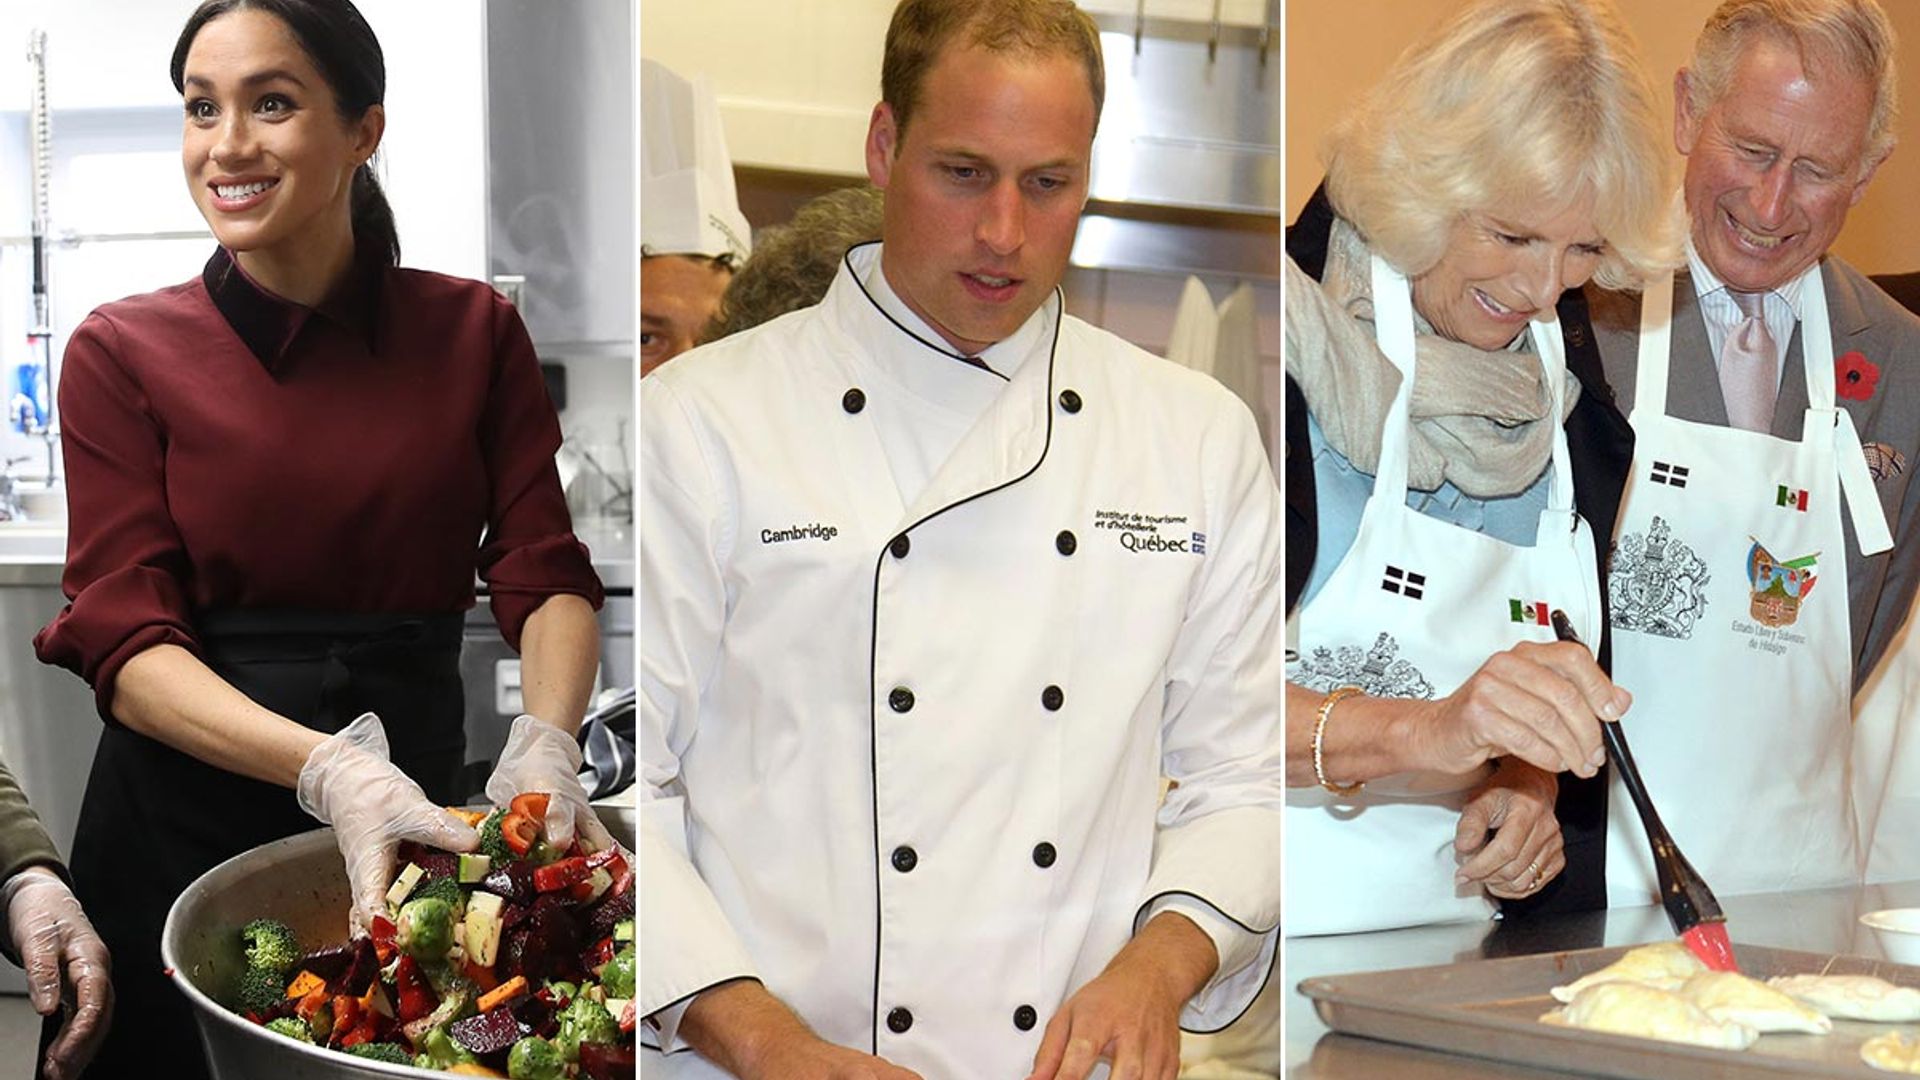 8 royals with surprising cooking skills: Kate Middleton, Prince George and more